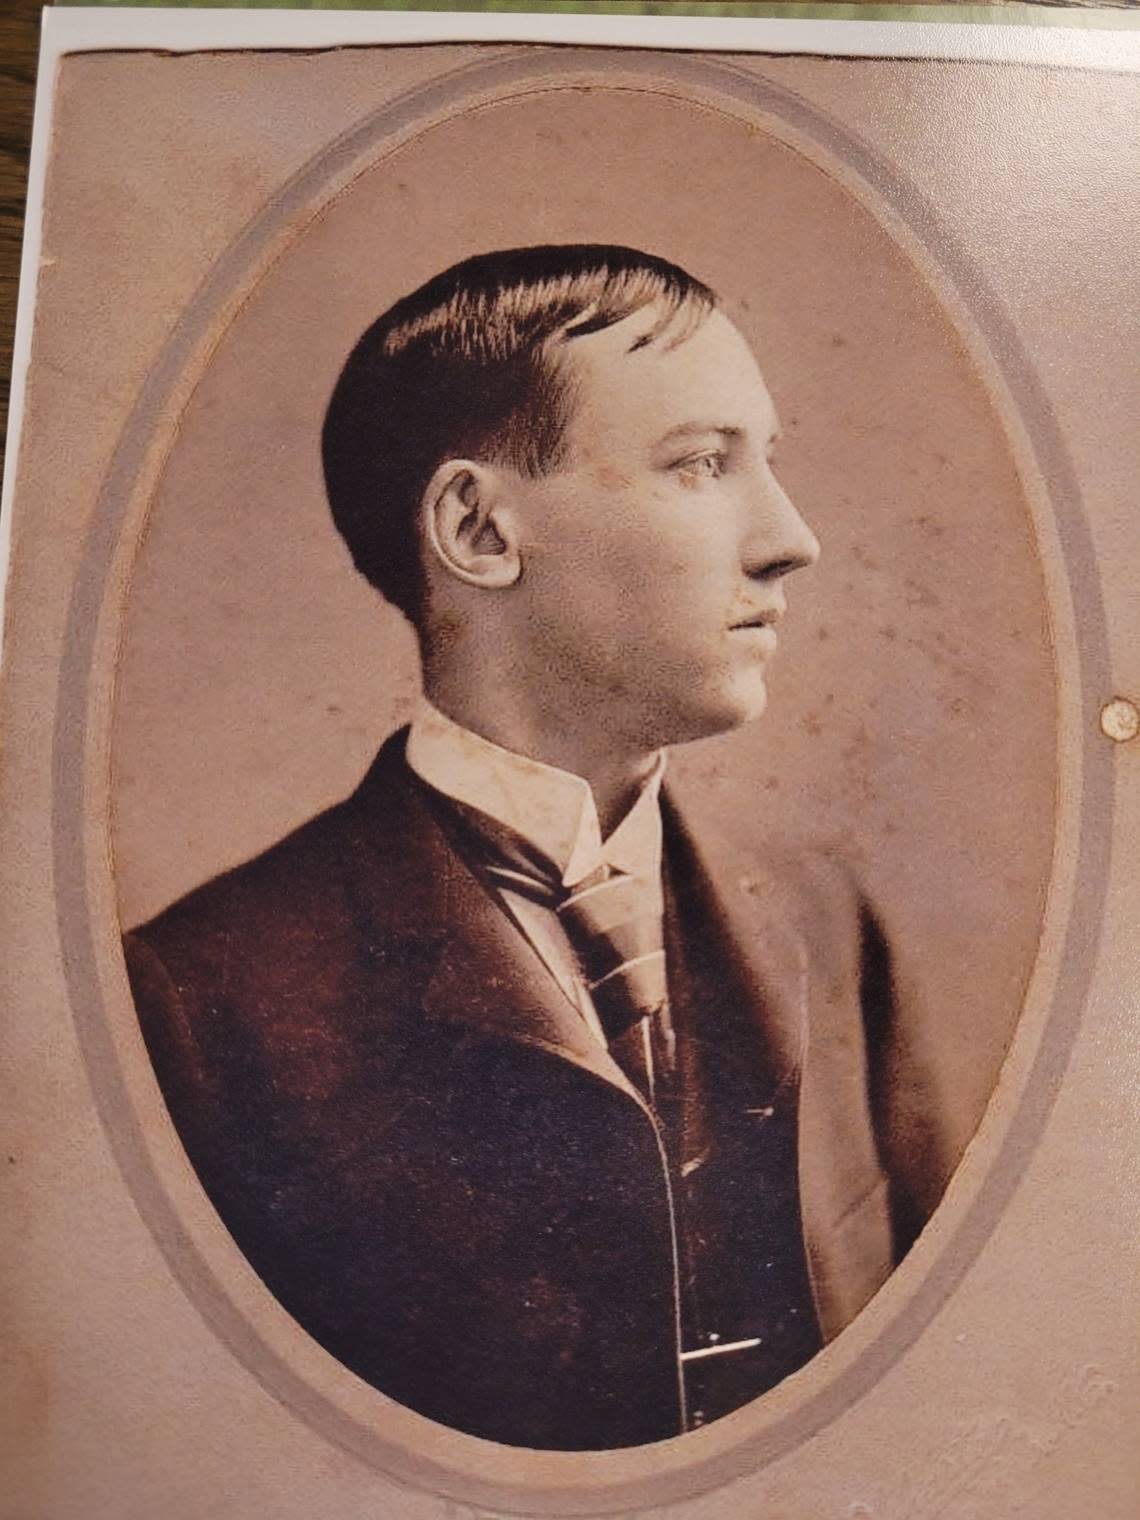 Ludlow Skinner, son of a prominent Raleigh Baptist pastor, was gunned down on Fayetteville Street in 1903 and is the subject of the new book “Life and Death in High Places.”